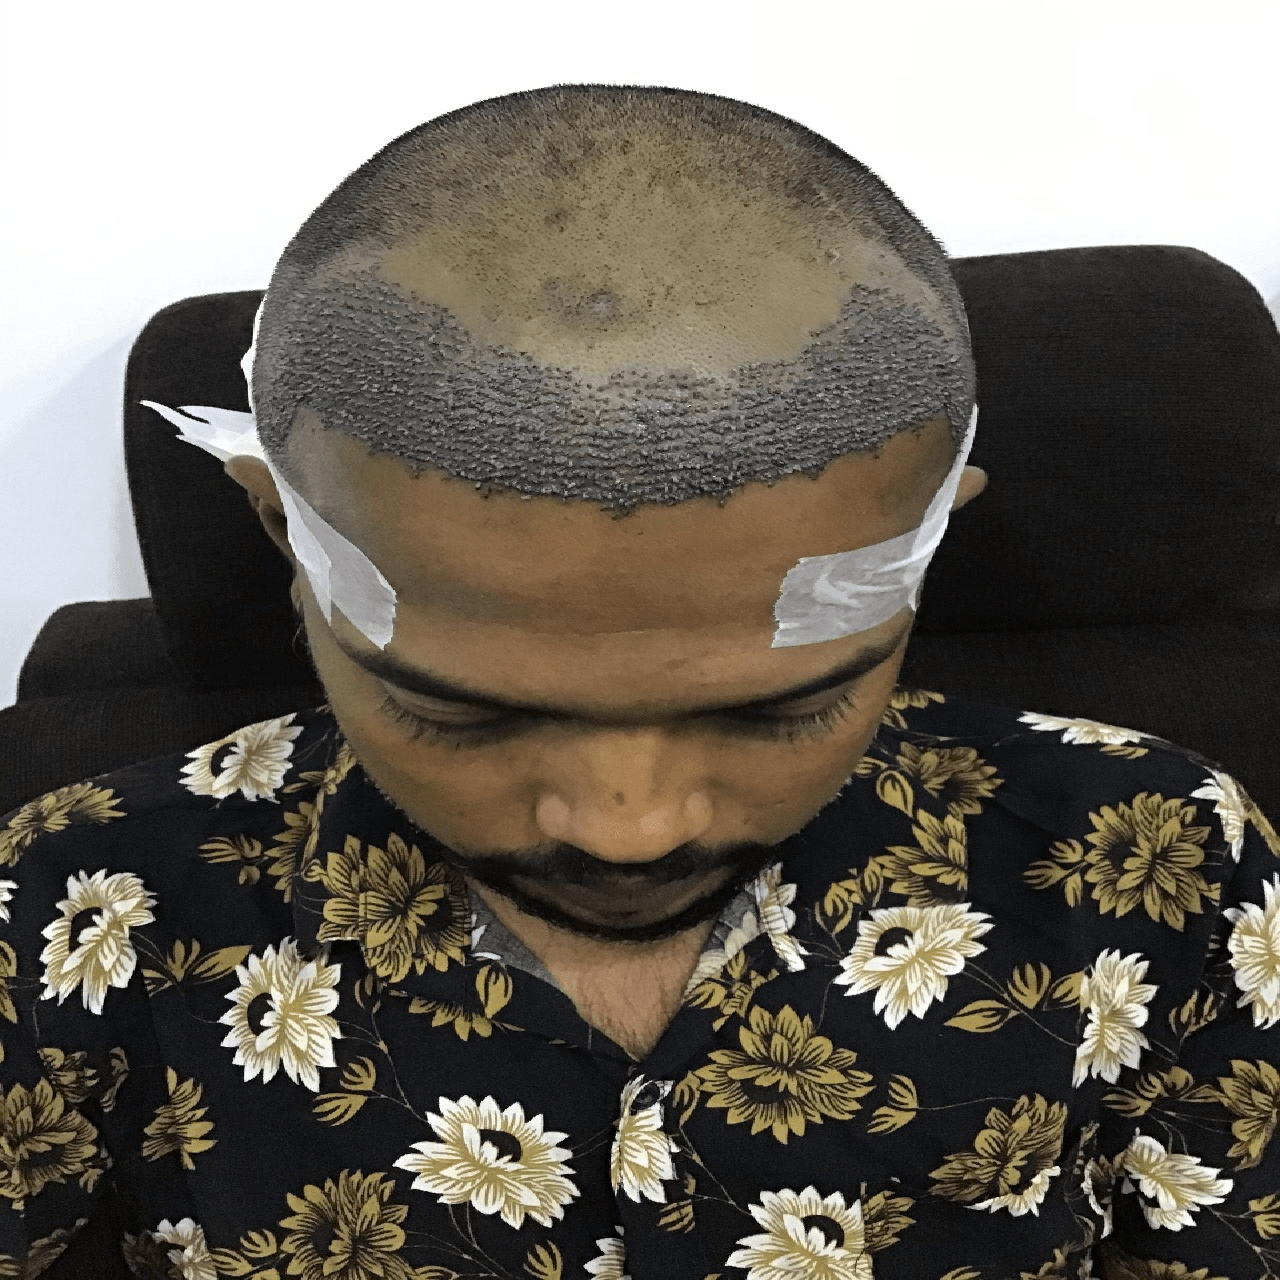 Hair Transplant After